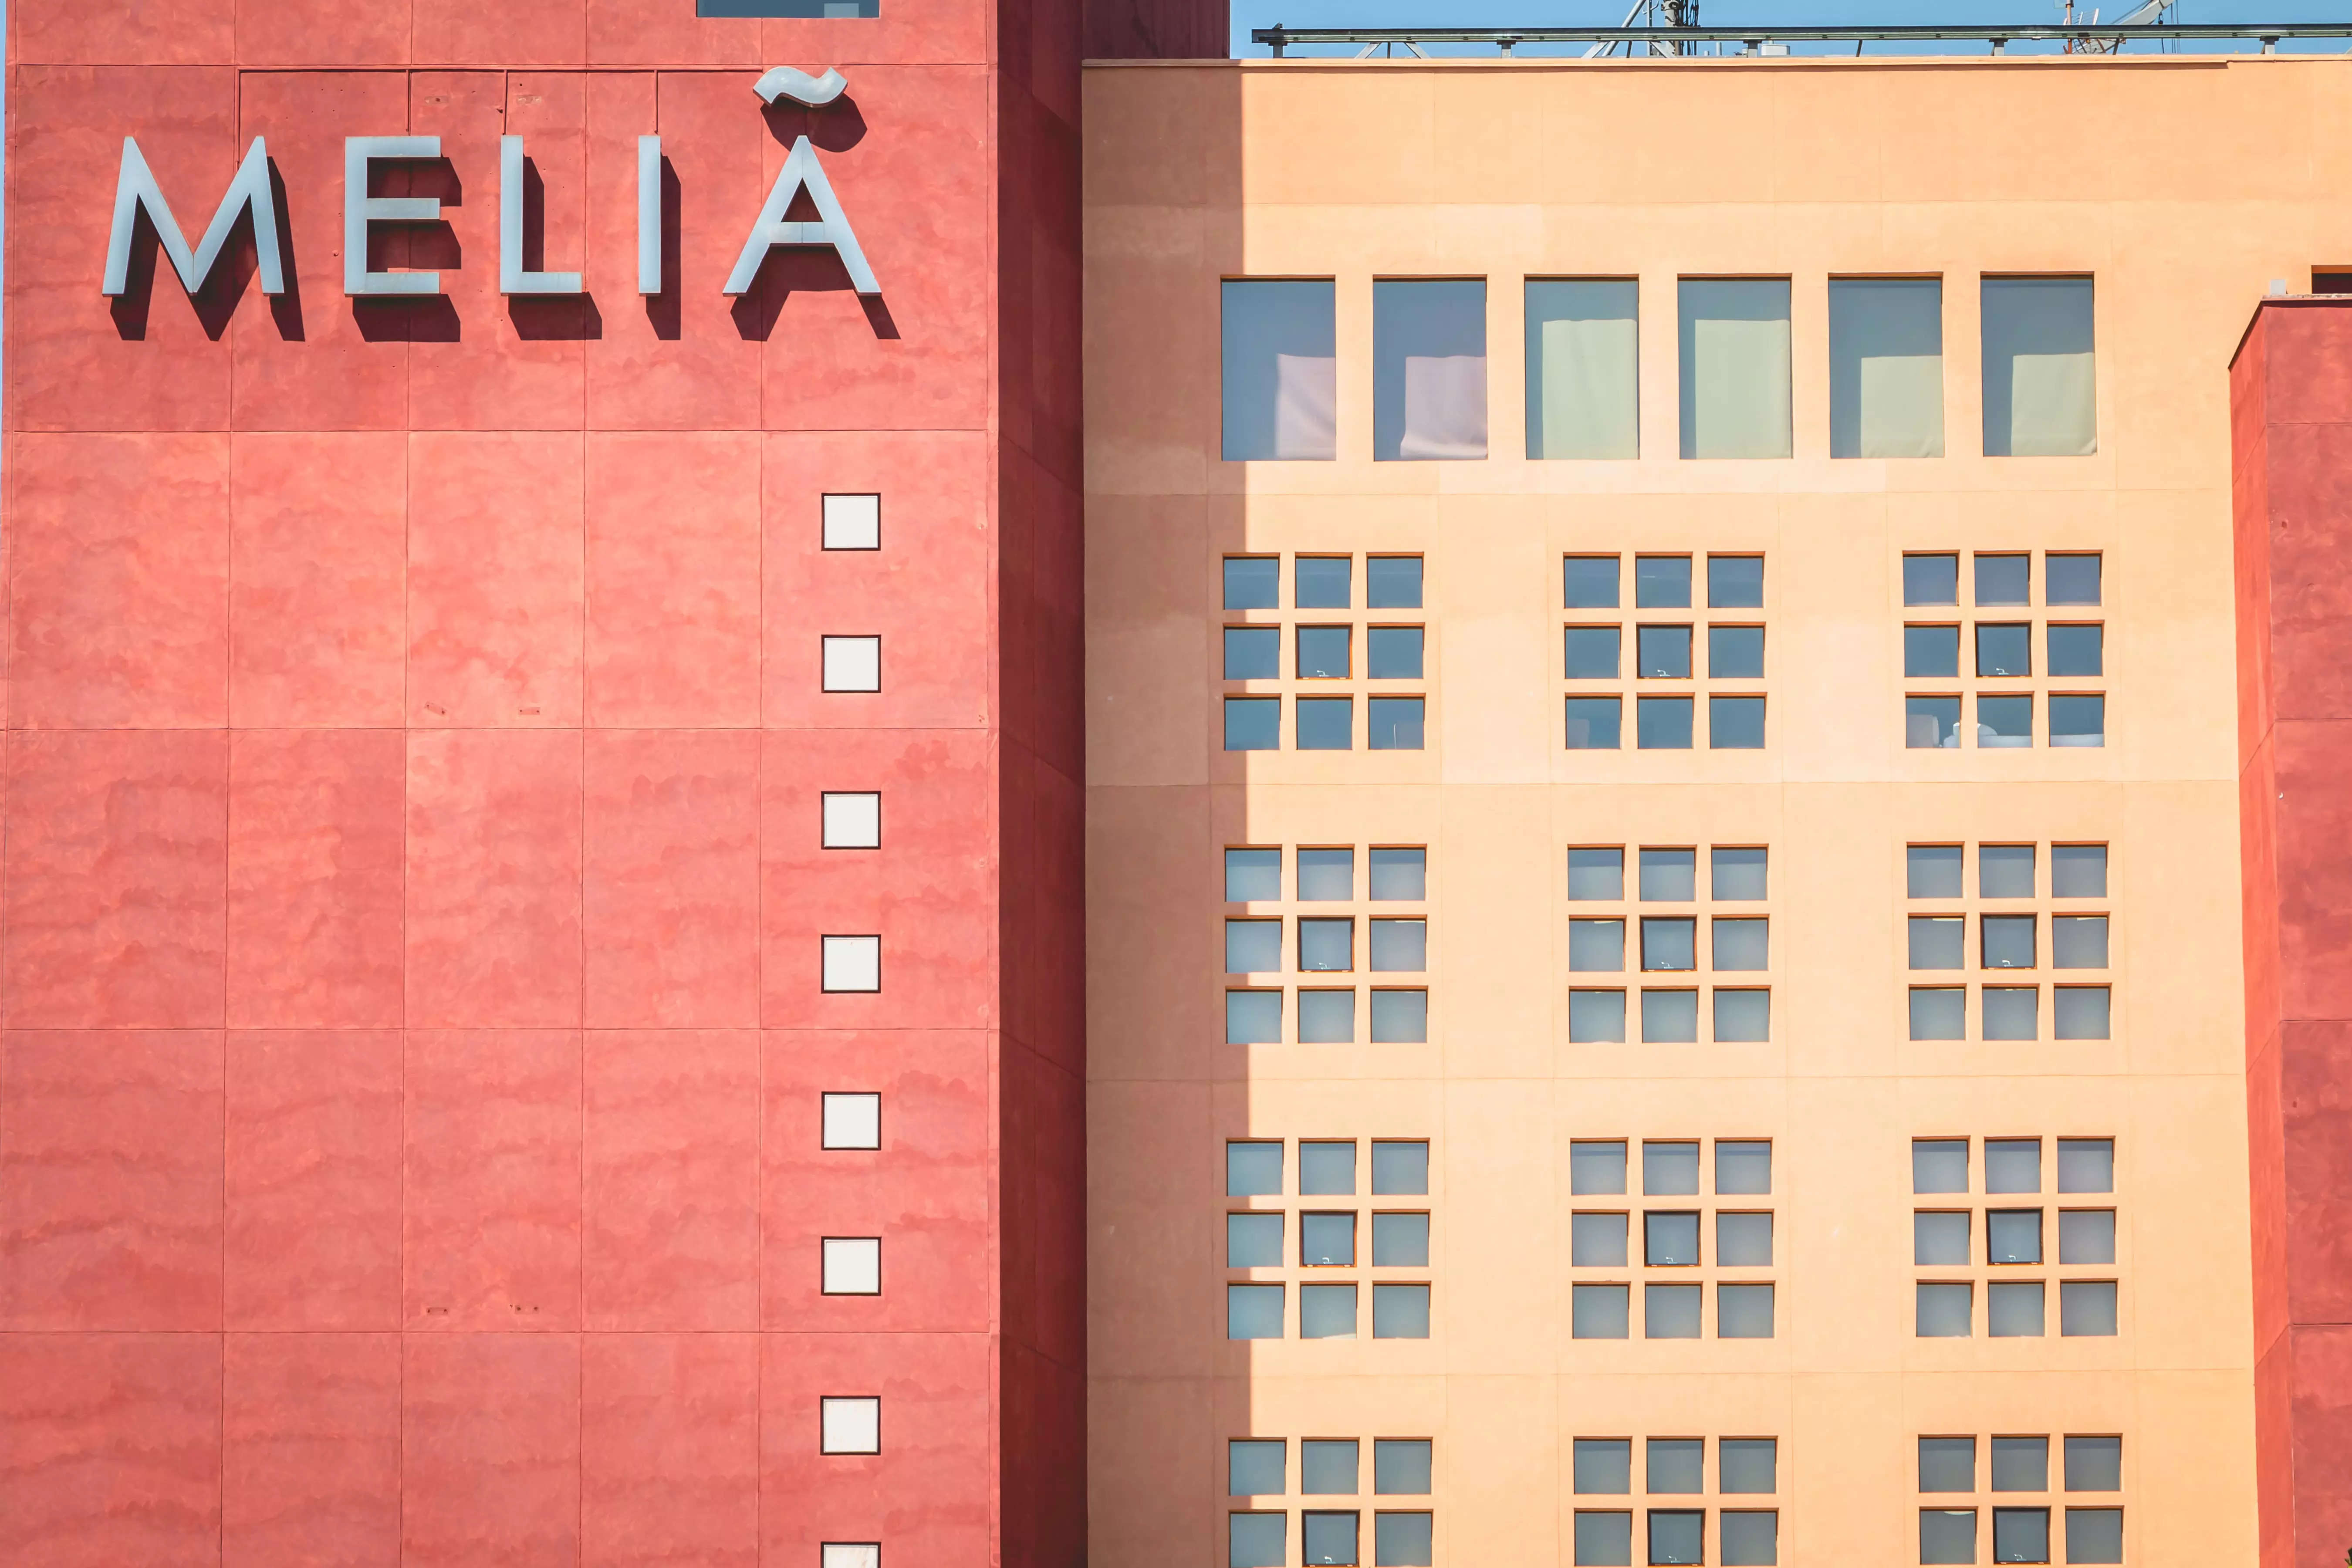 Melia Hotels returns to profits in H1 on tourism rebound in Spain